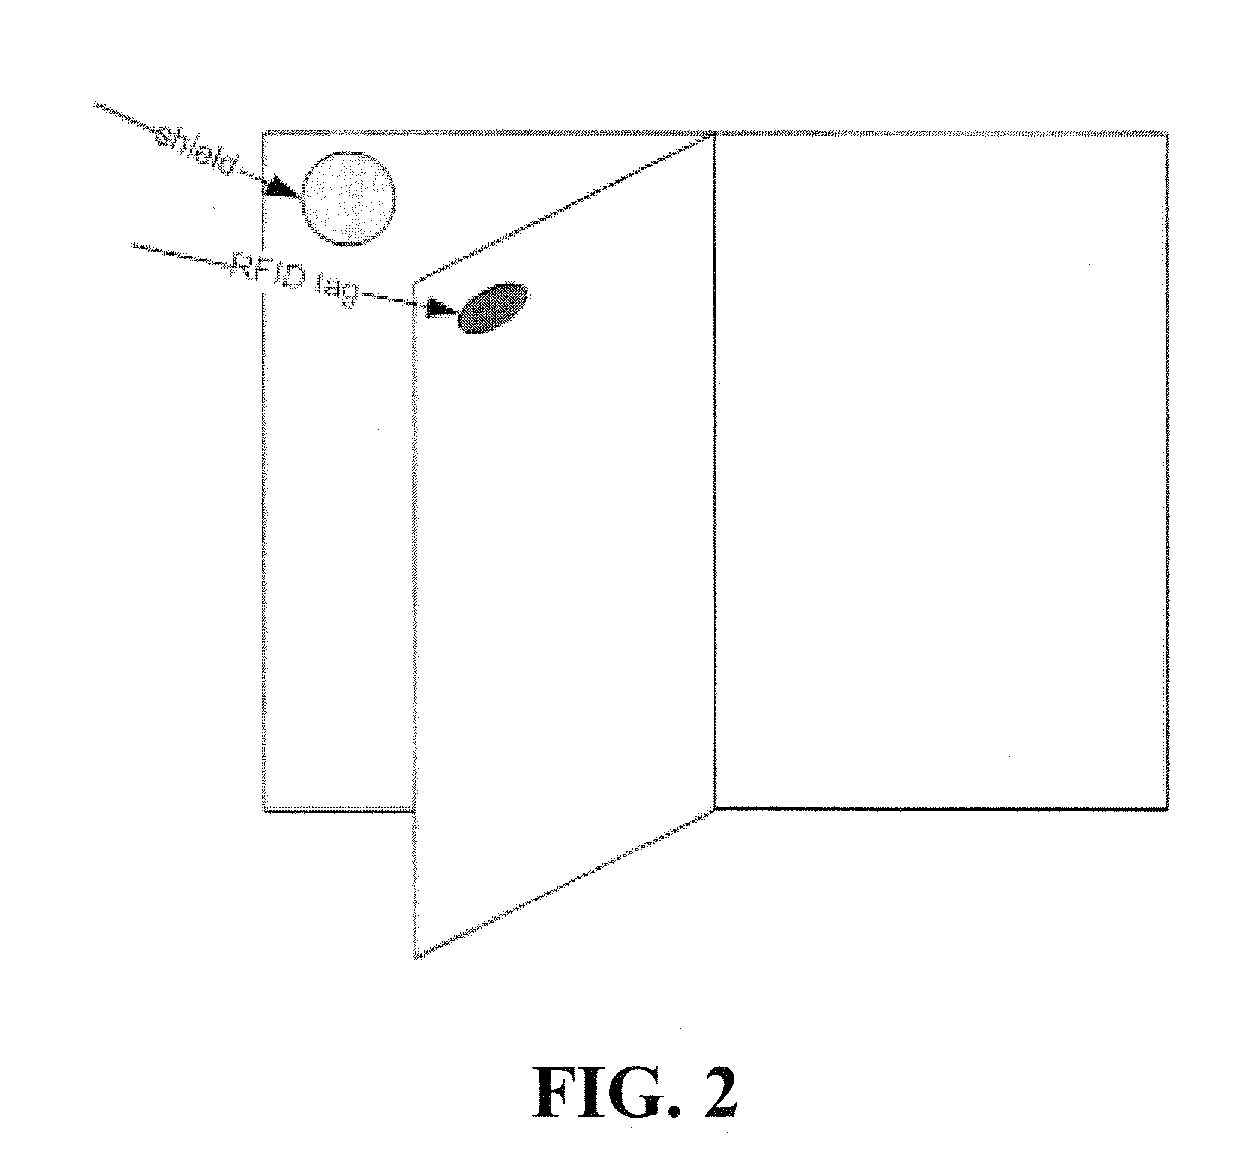 Method and Apparatus for Integrating Audio and/or Video With a Book